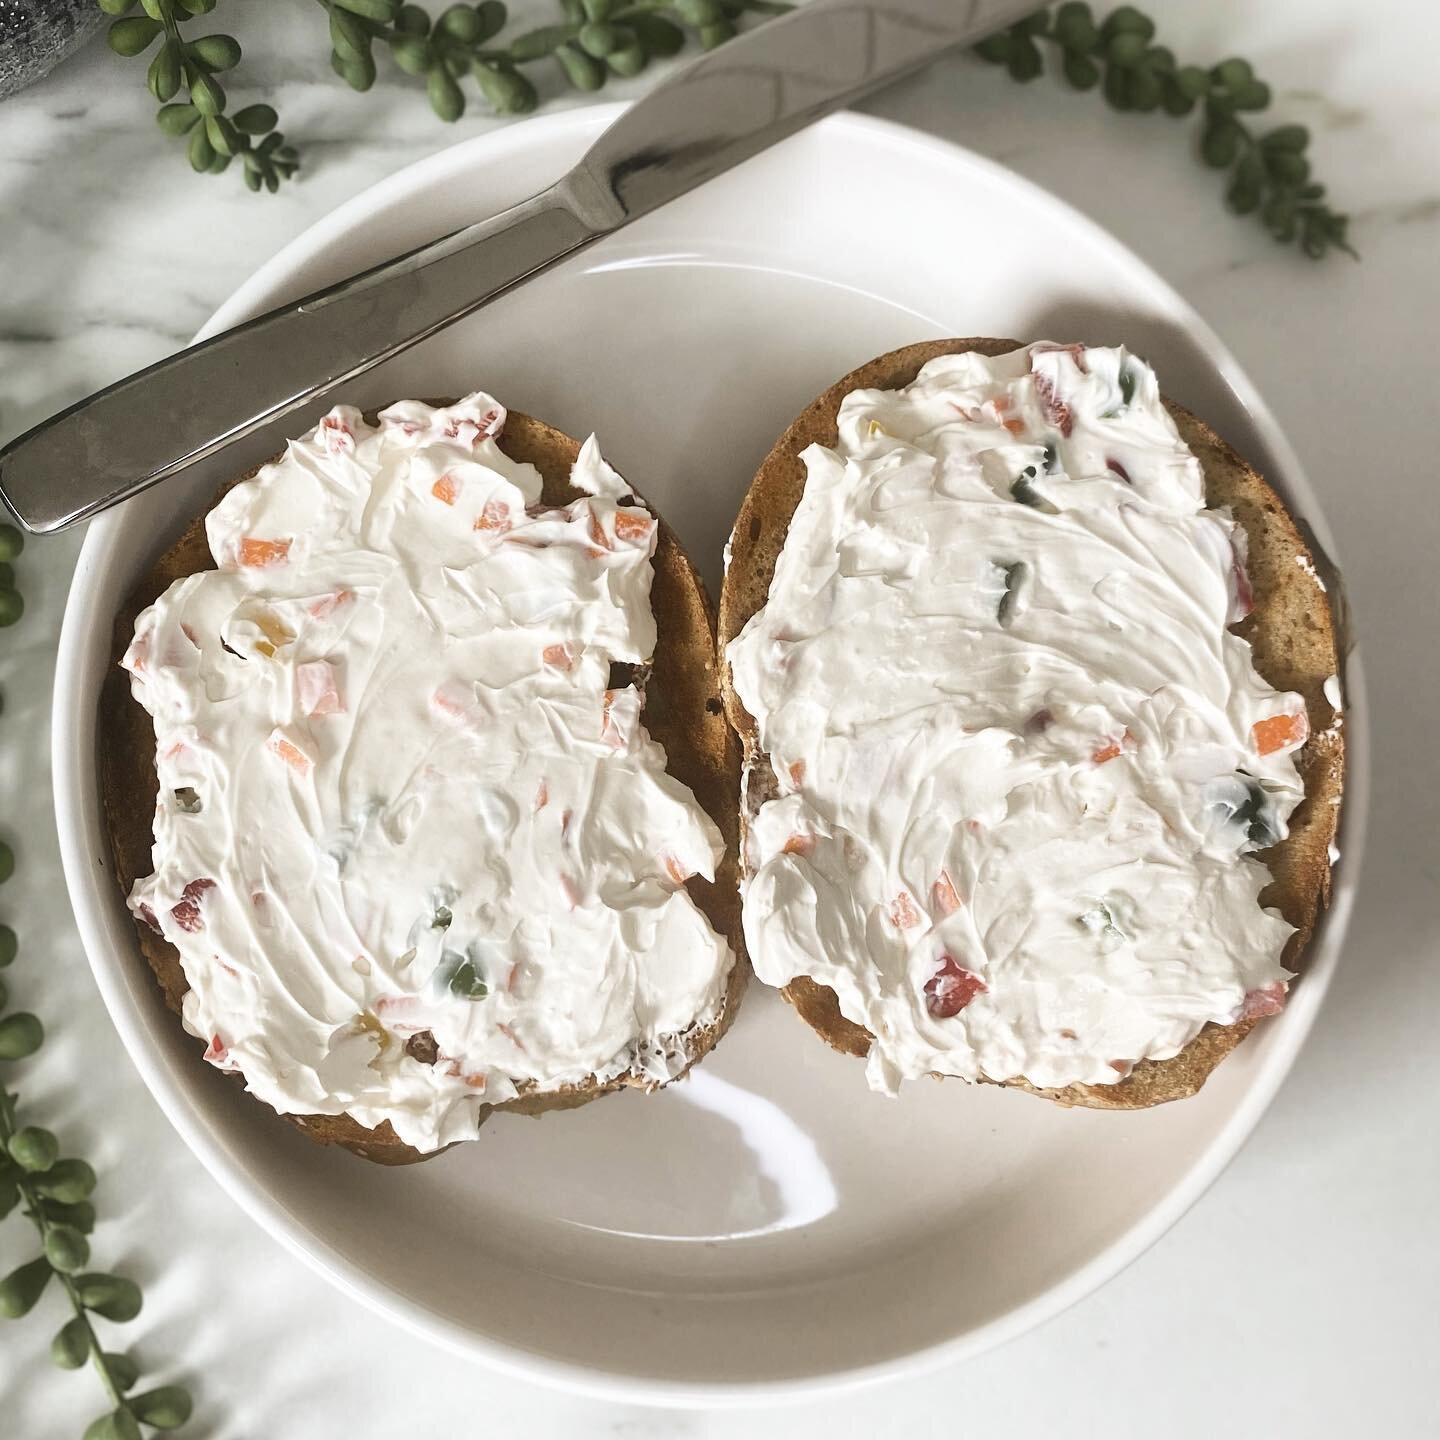 Nothing like a whole wheat bagel with veggie TOFU cream cheese&hellip;. #veganbreakfast ✌🏼🫑🥯

Did you know we have tofu cream cheese?! This completely dairy-free option comes in plain, veggie &amp; scallion flavors. 🥯

Click the link in our bio t